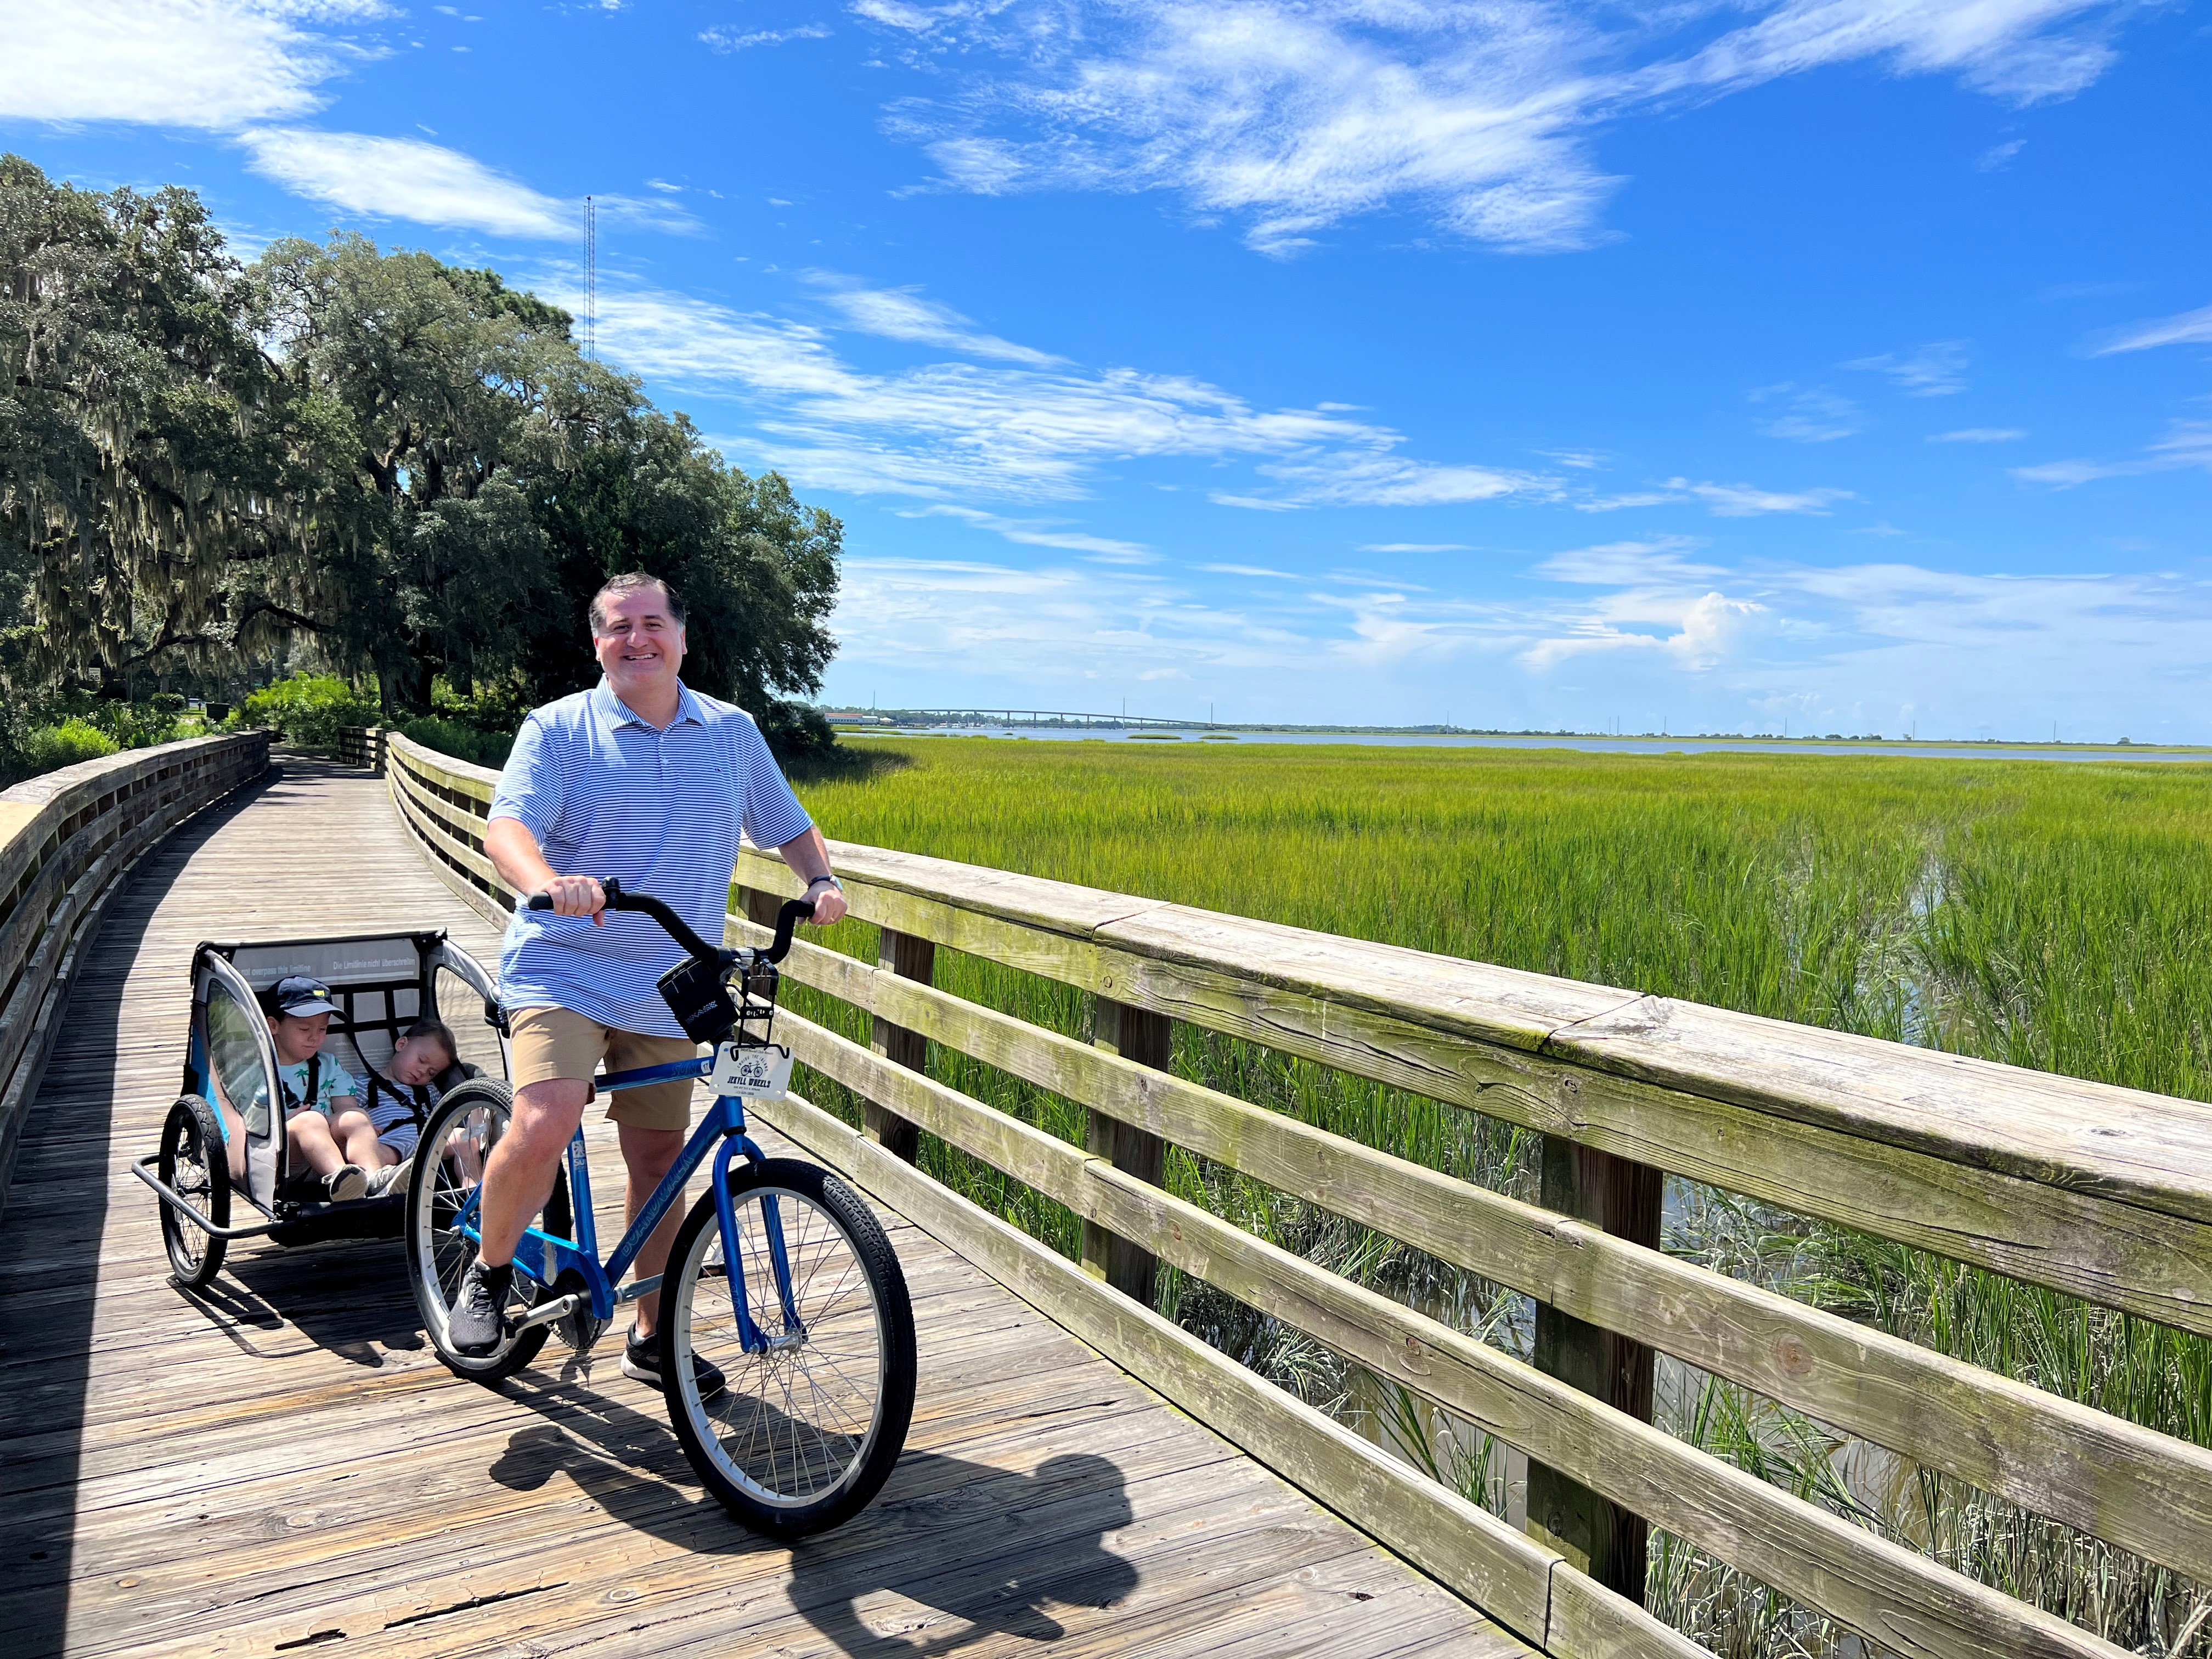 Justin enjoys traveling with his family to Jekyll Island in northern Georgia and cycling with his sons, Henry and Preston